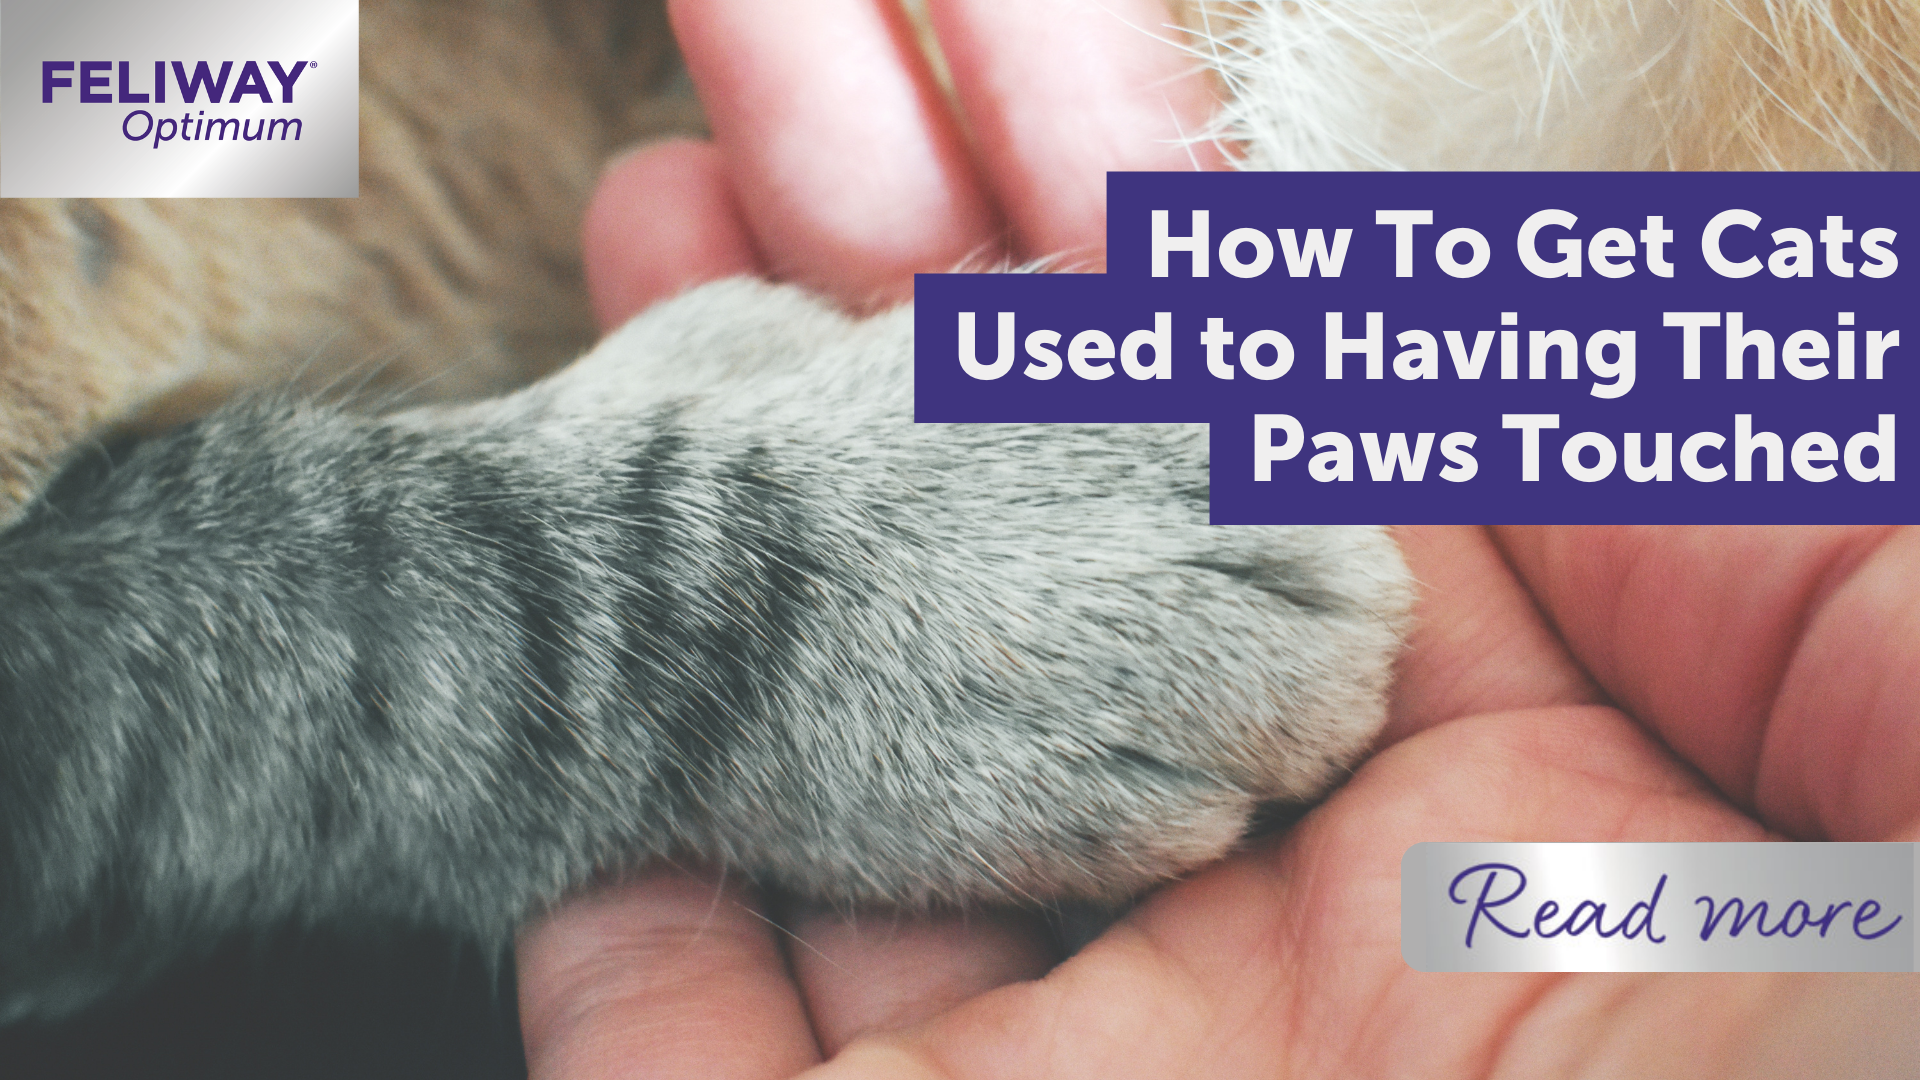 HOW TO GET CATS USED TO HAVING THEIR PAWS TOUCHED